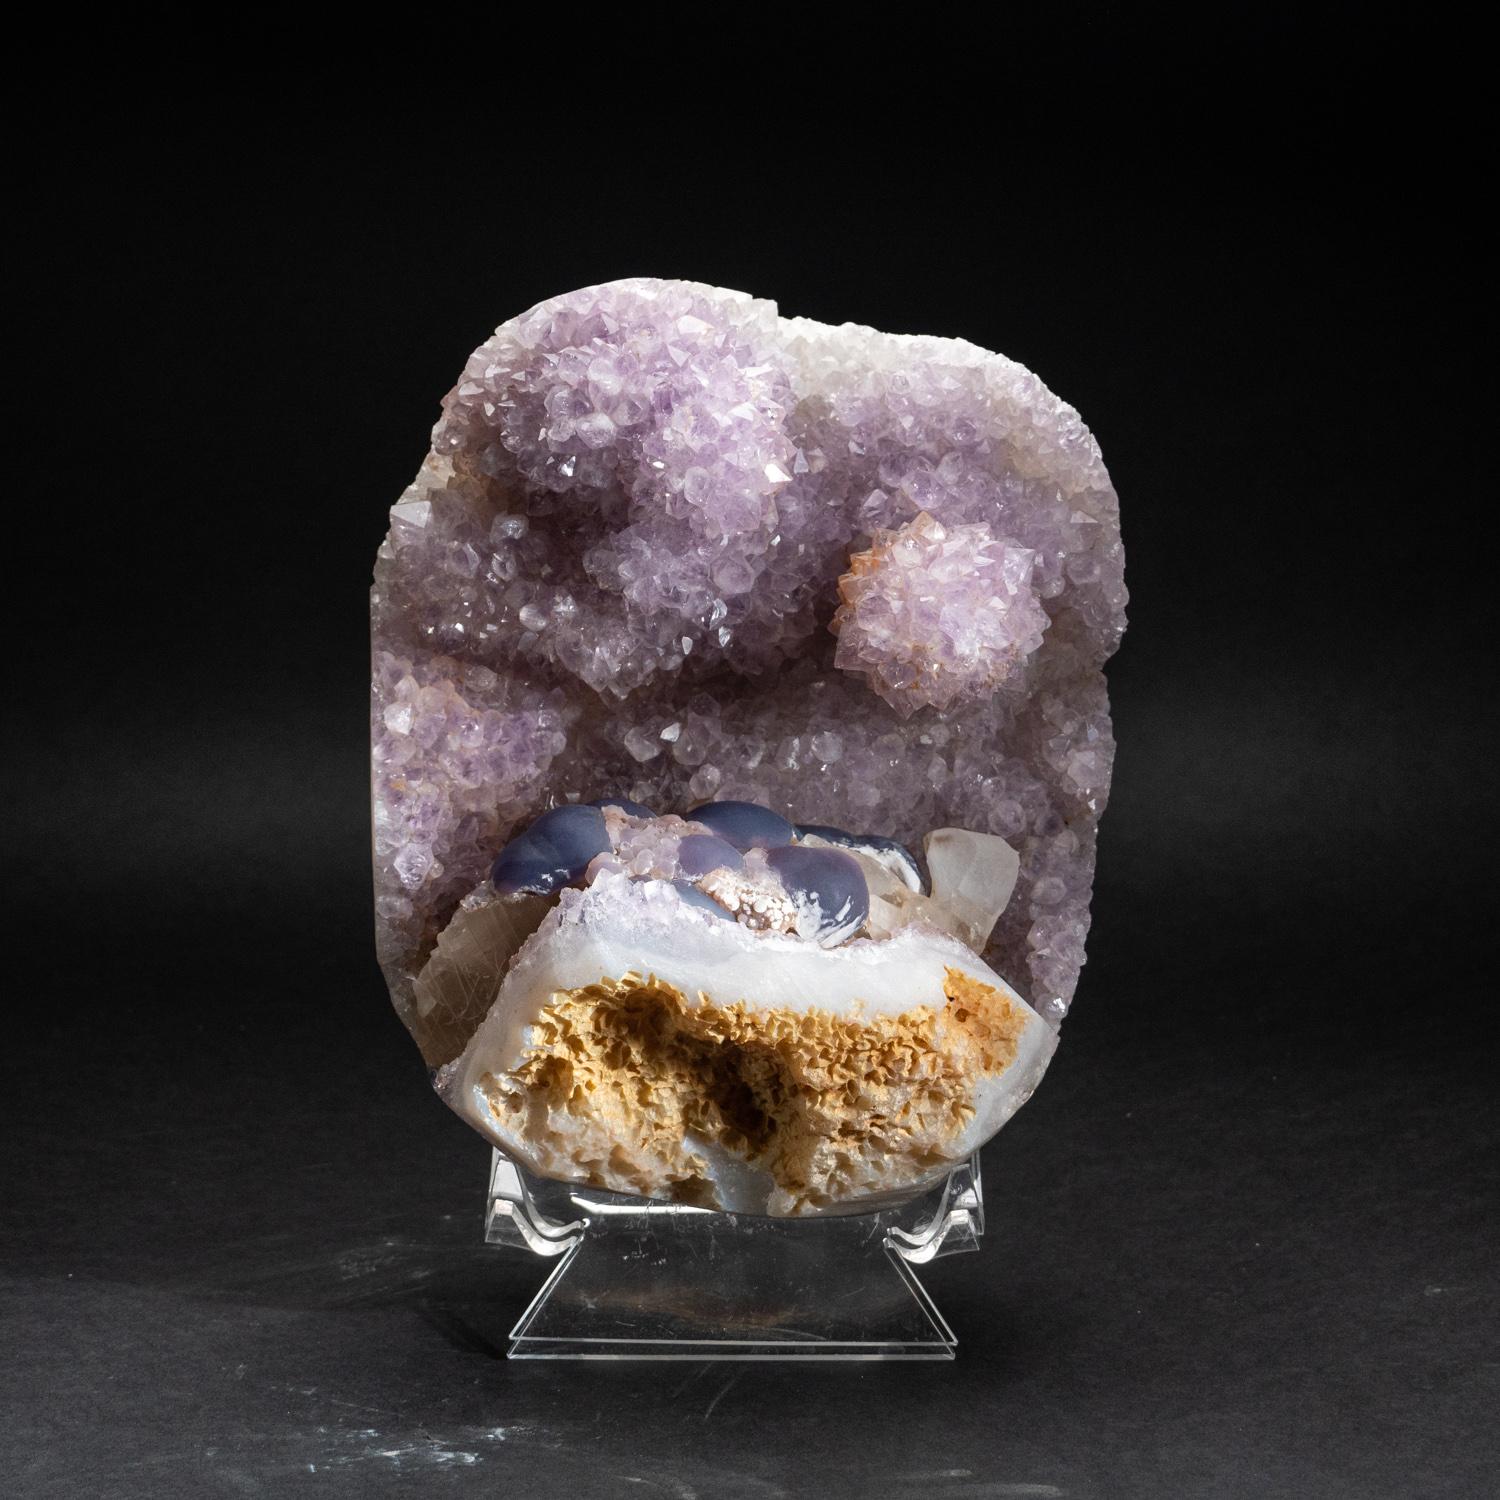 Museum quality, rare undulating formation of a gemmy transparent amethyst cluster with a cluster of spherical purple fluorite. These amethyst crystals are fully terminated, with a bright gradient color of purple to a deep grape purple color. The